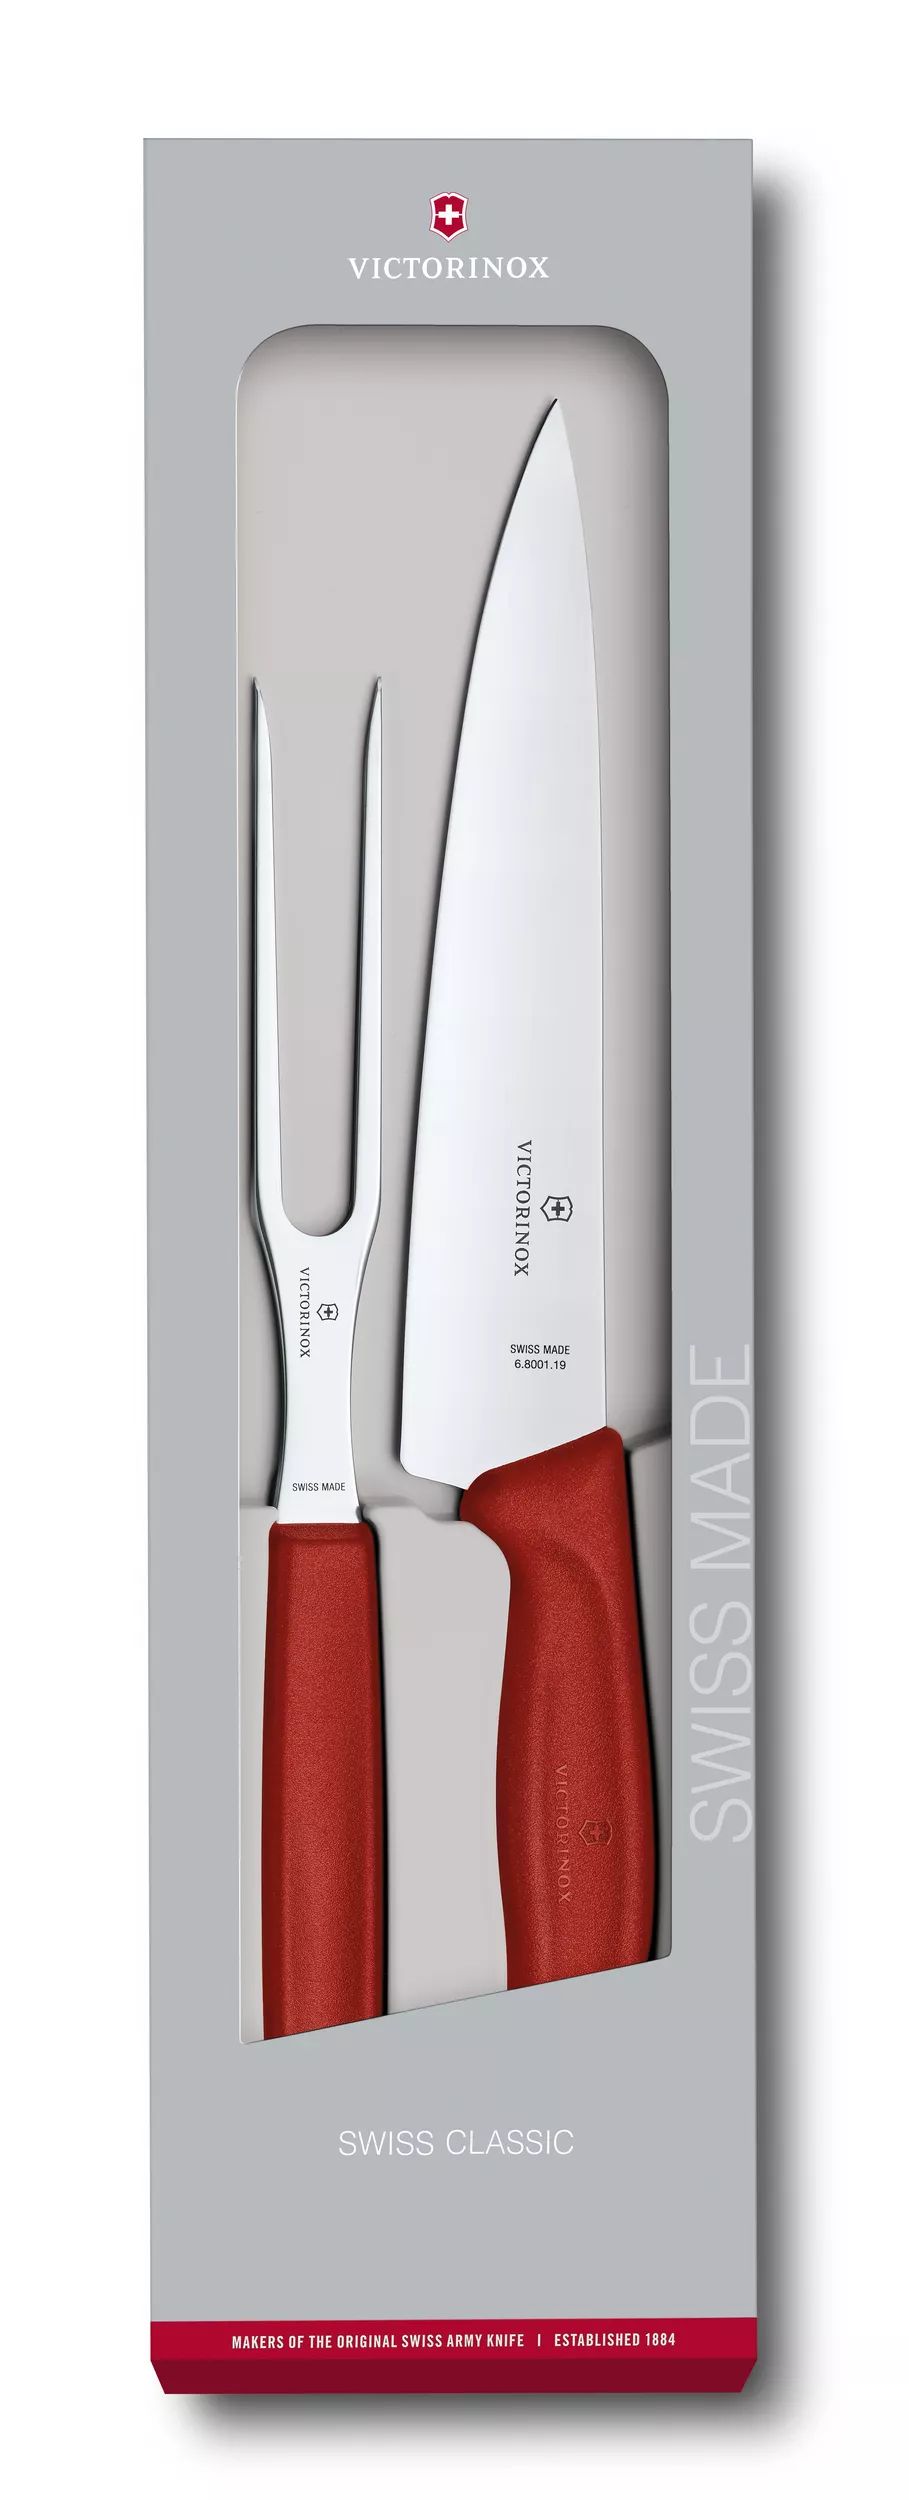 Swiss Classic Carving Set, 2 pieces-6.7131.2G